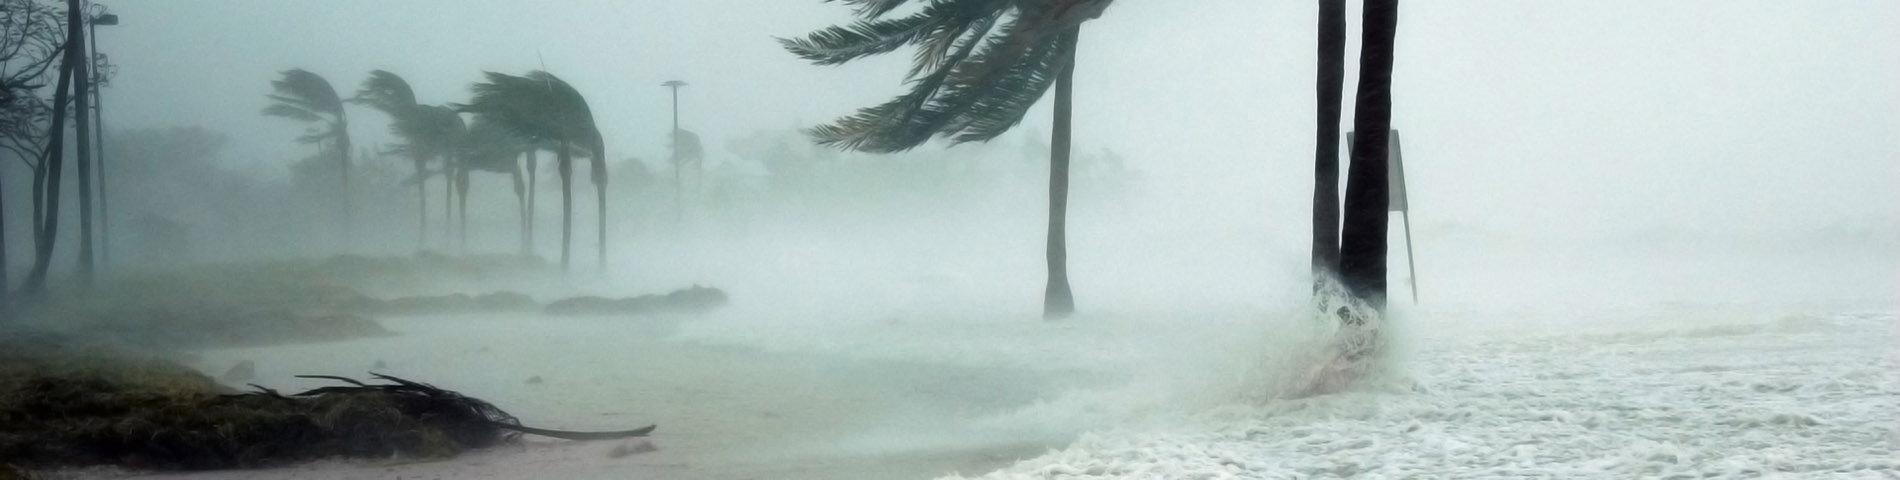 A beach showing signs of severe hurricane weather.